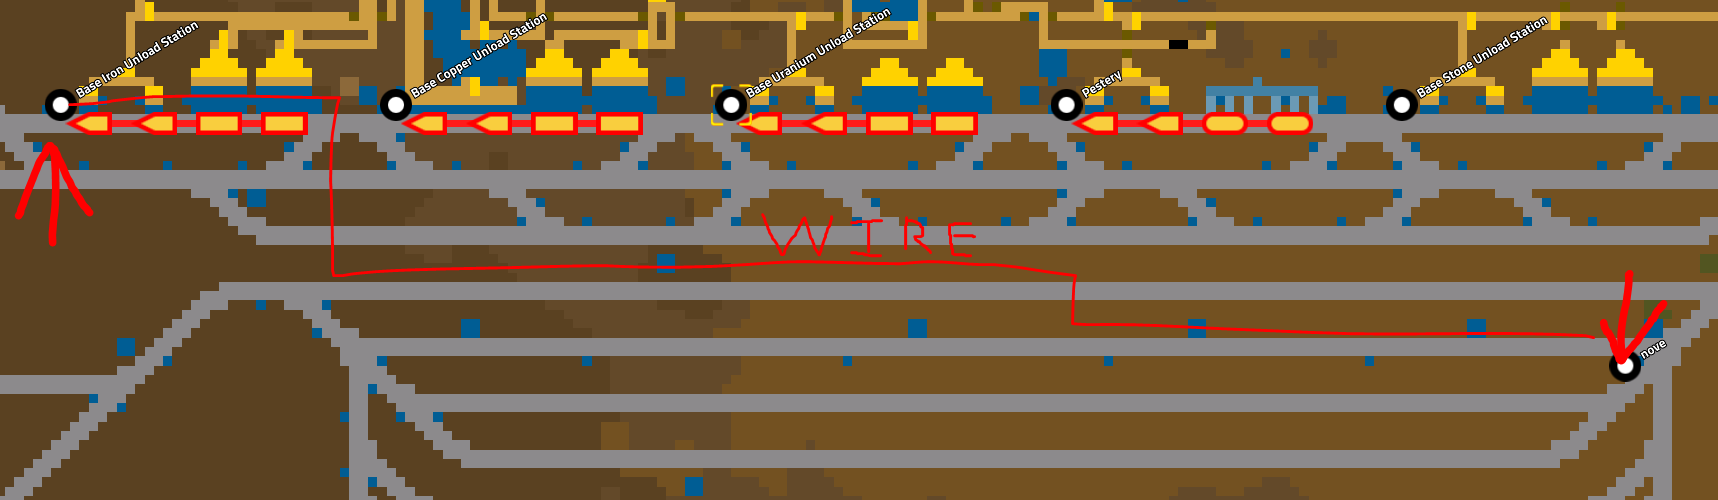 Train Example.PNG